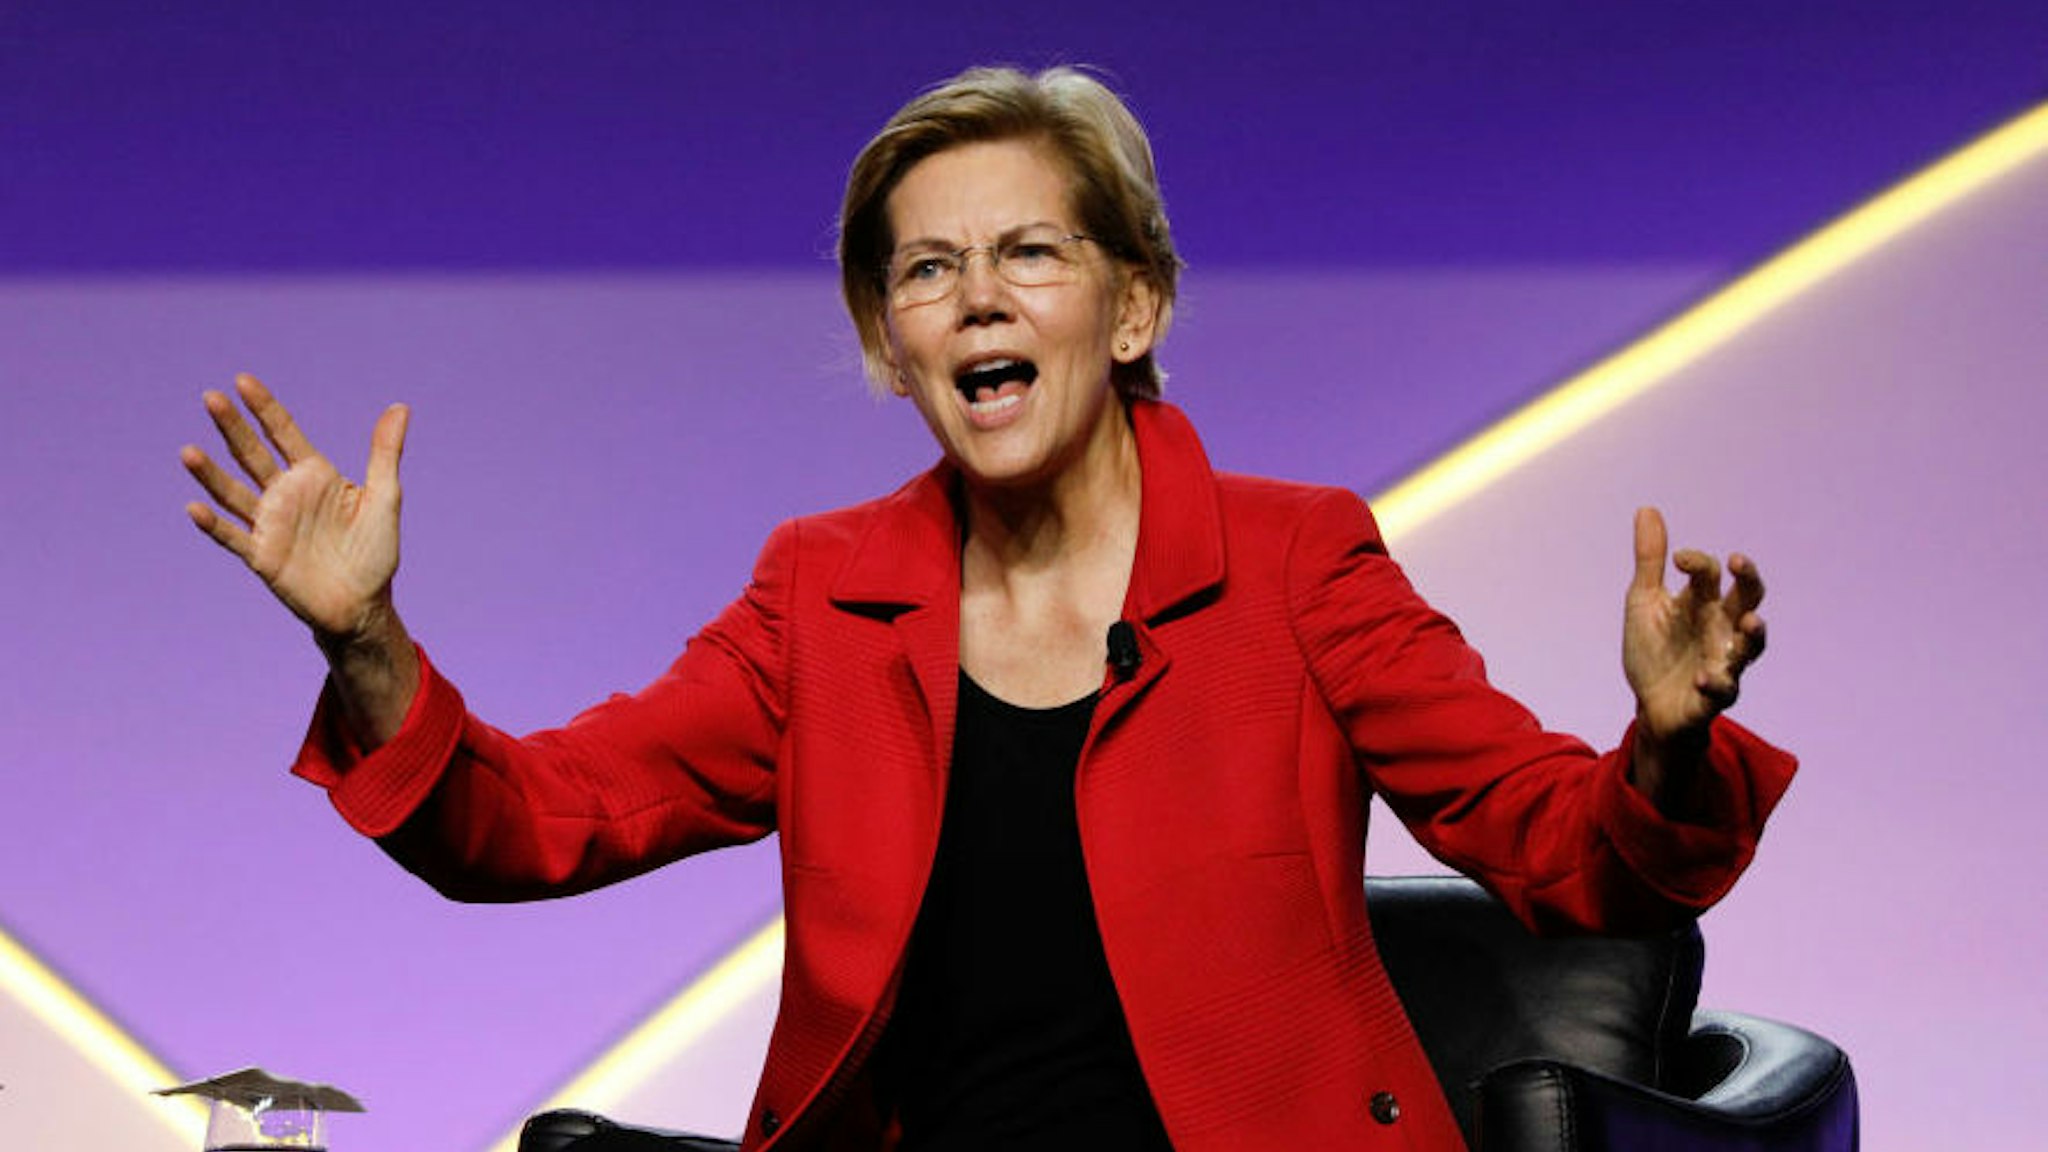 DETROIT, MI - JULY 24: Senator Elizabeth Warren (D-MA) participates in a Presidential Candidates Forum at the NAACP 110th National Convention on July 24, 2019 in Detroit, Michigan. The theme of this year’s Convention is, “When We Fight, We Win.”